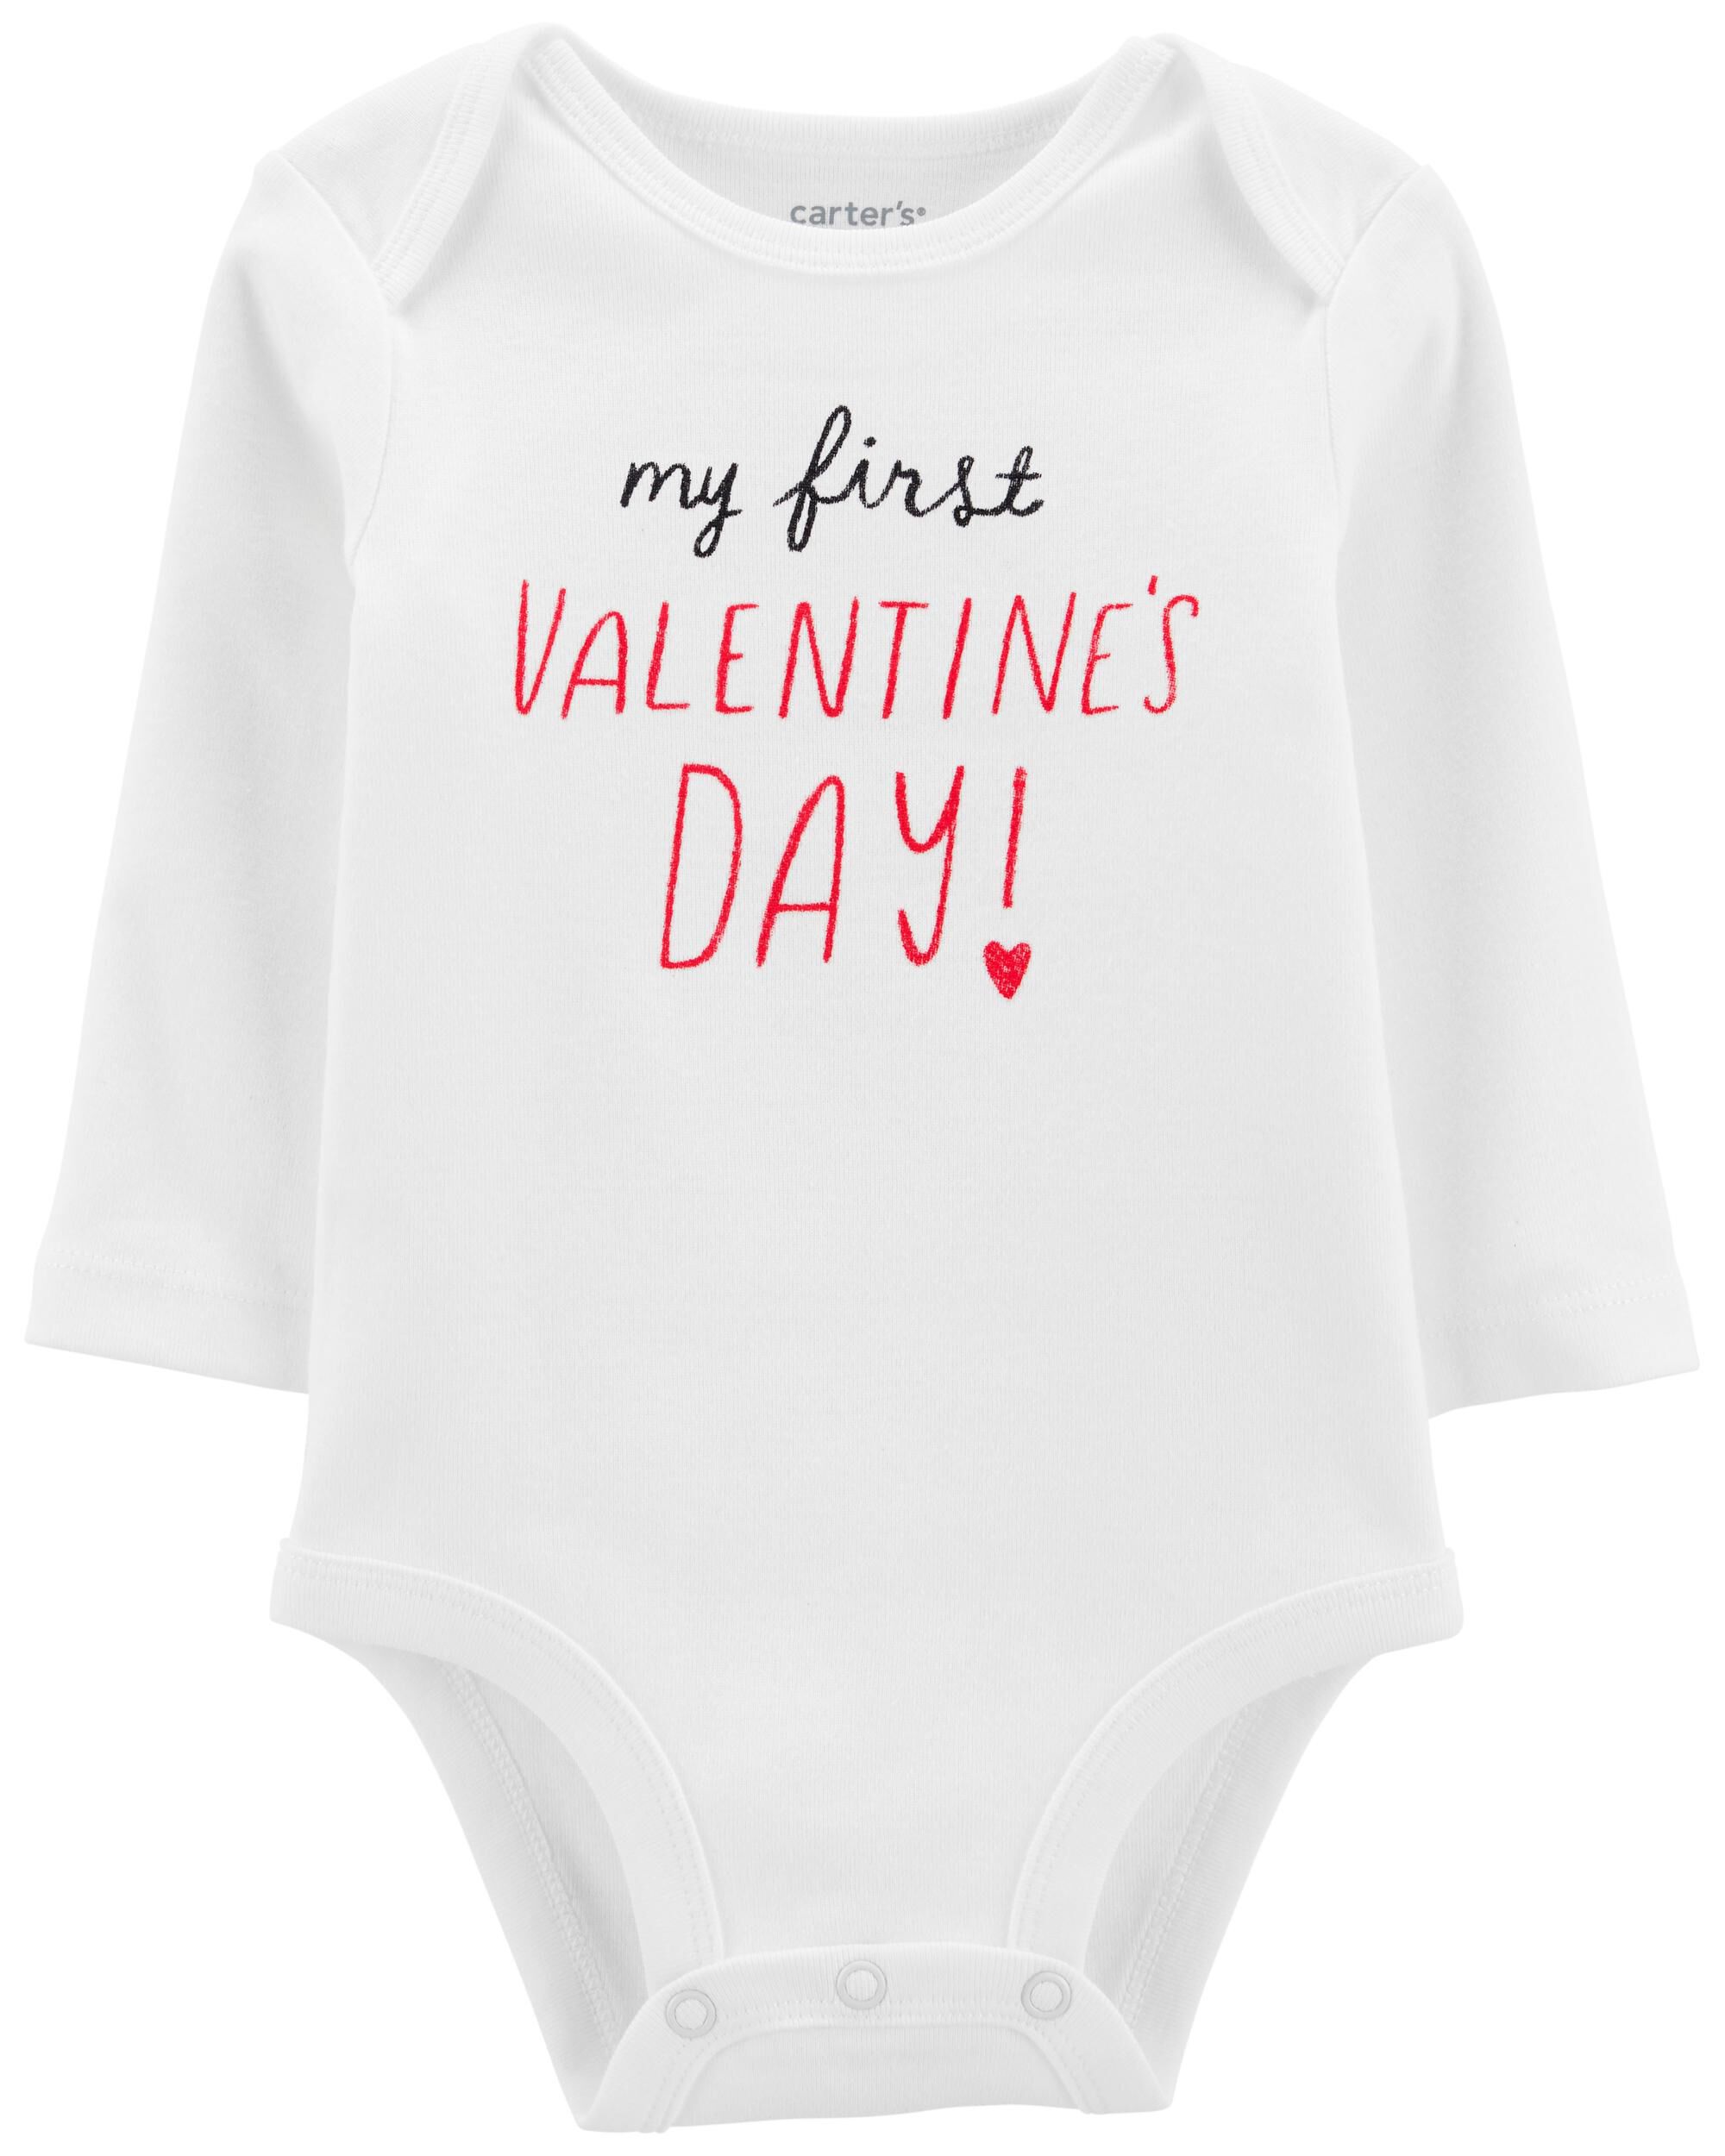 ST VALENTINE'S DAY Baby Grow Vest Bodysuit T-Shirt Kids Adults FAMILY MATCHING 